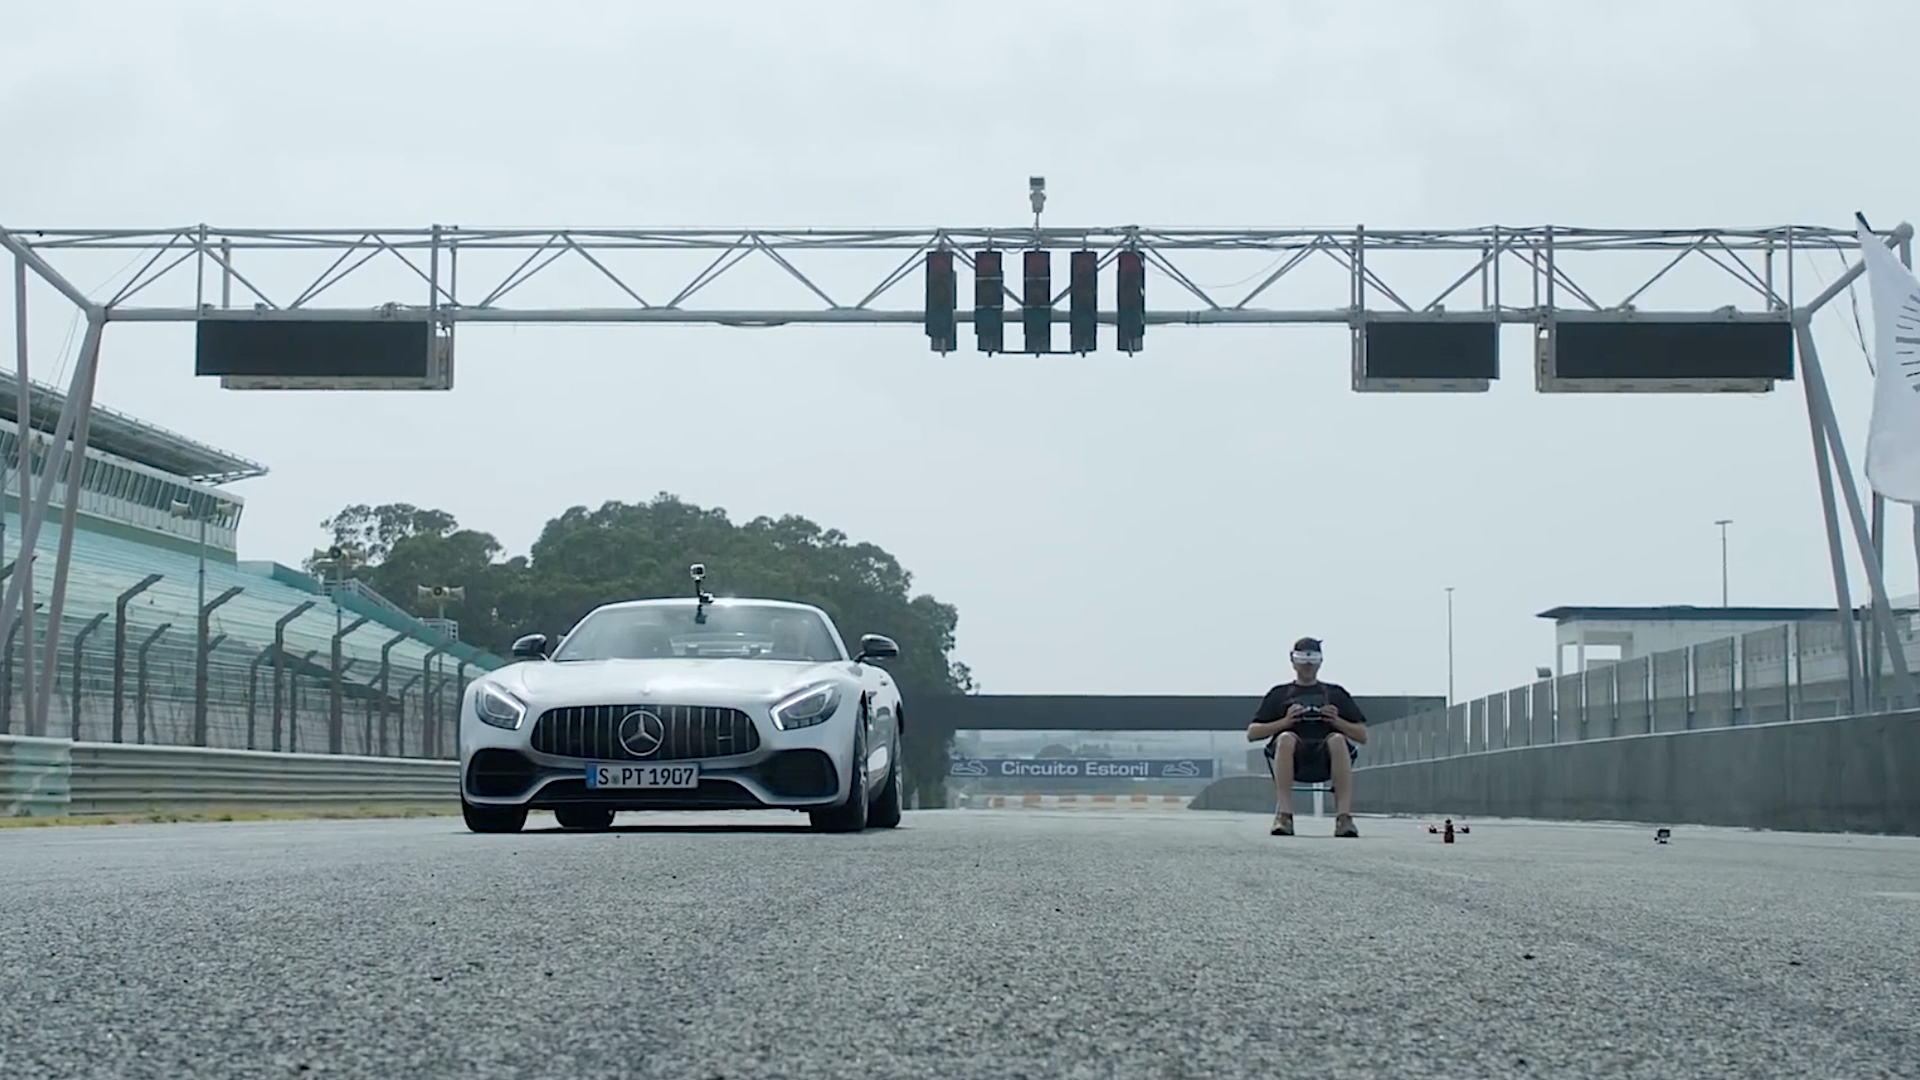 Watch a Mercedes-AMG GT Drag Race Drone That Hits 60 MPH in 1 Second